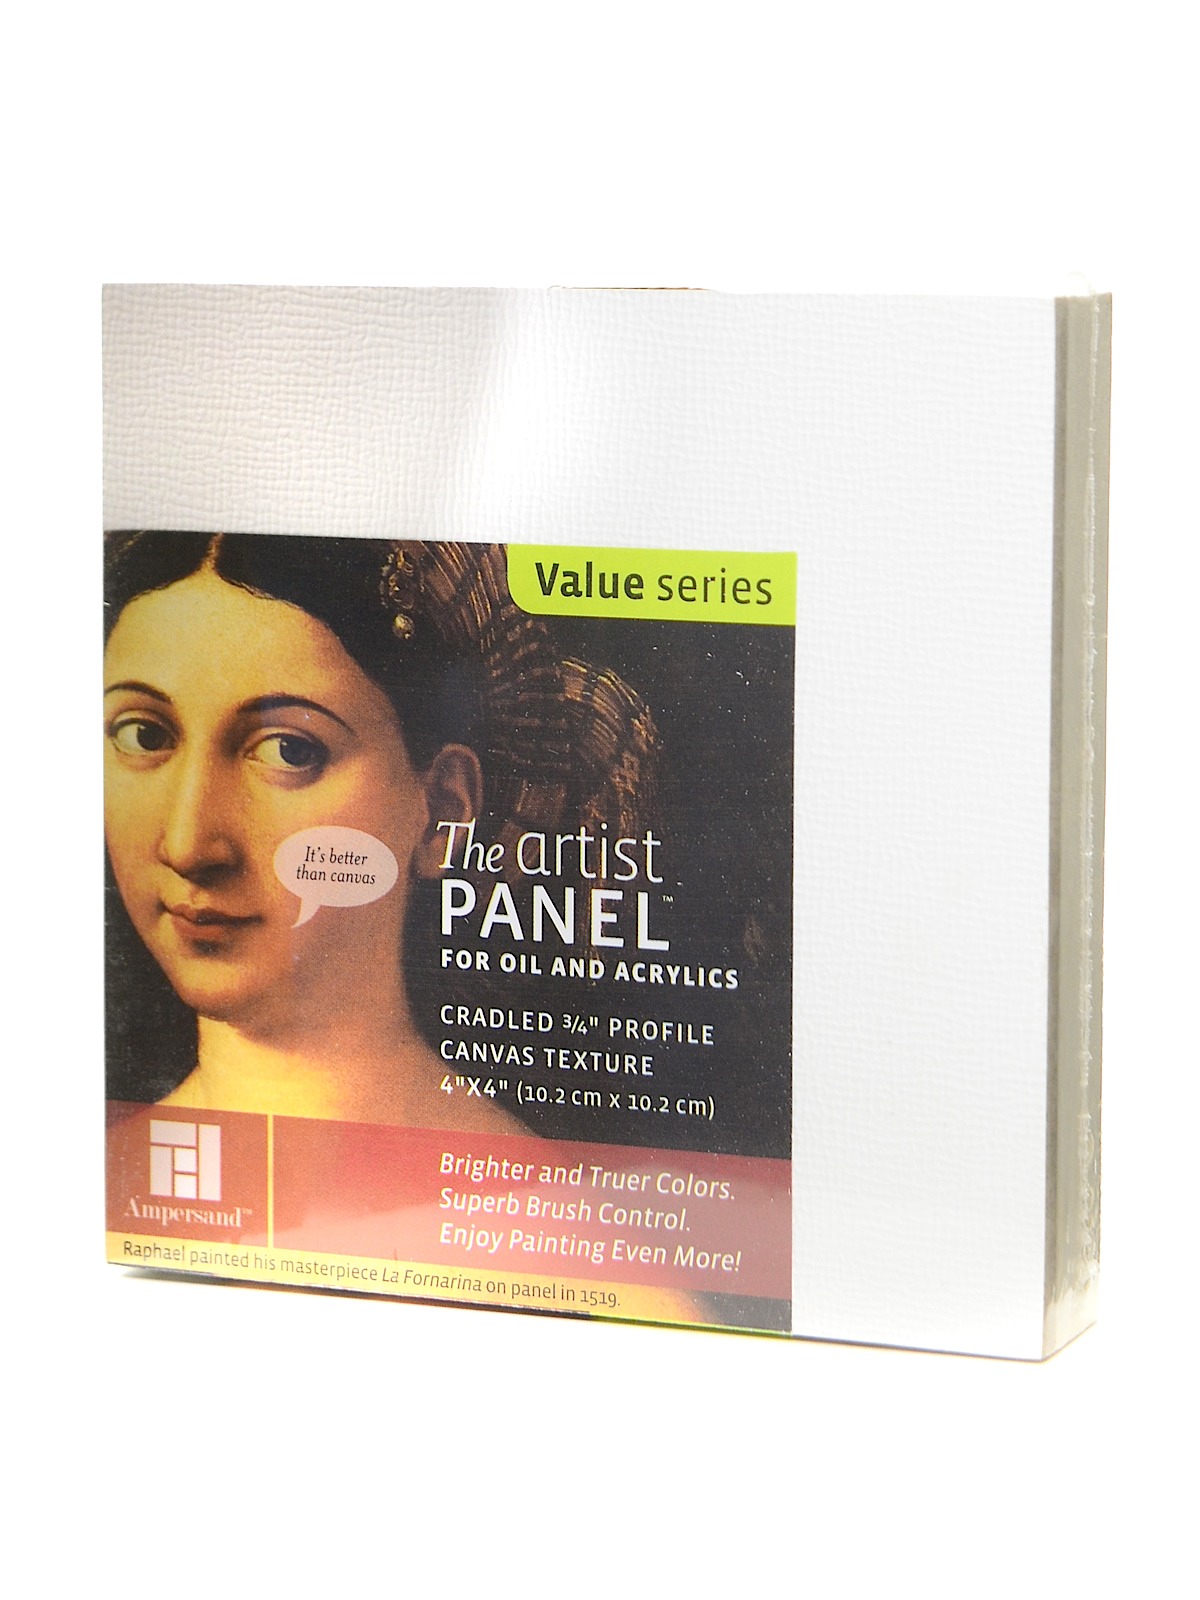 The Artist Panel Canvas Texture Cradled Profile 4 In. X 4 In. 3 4 In.